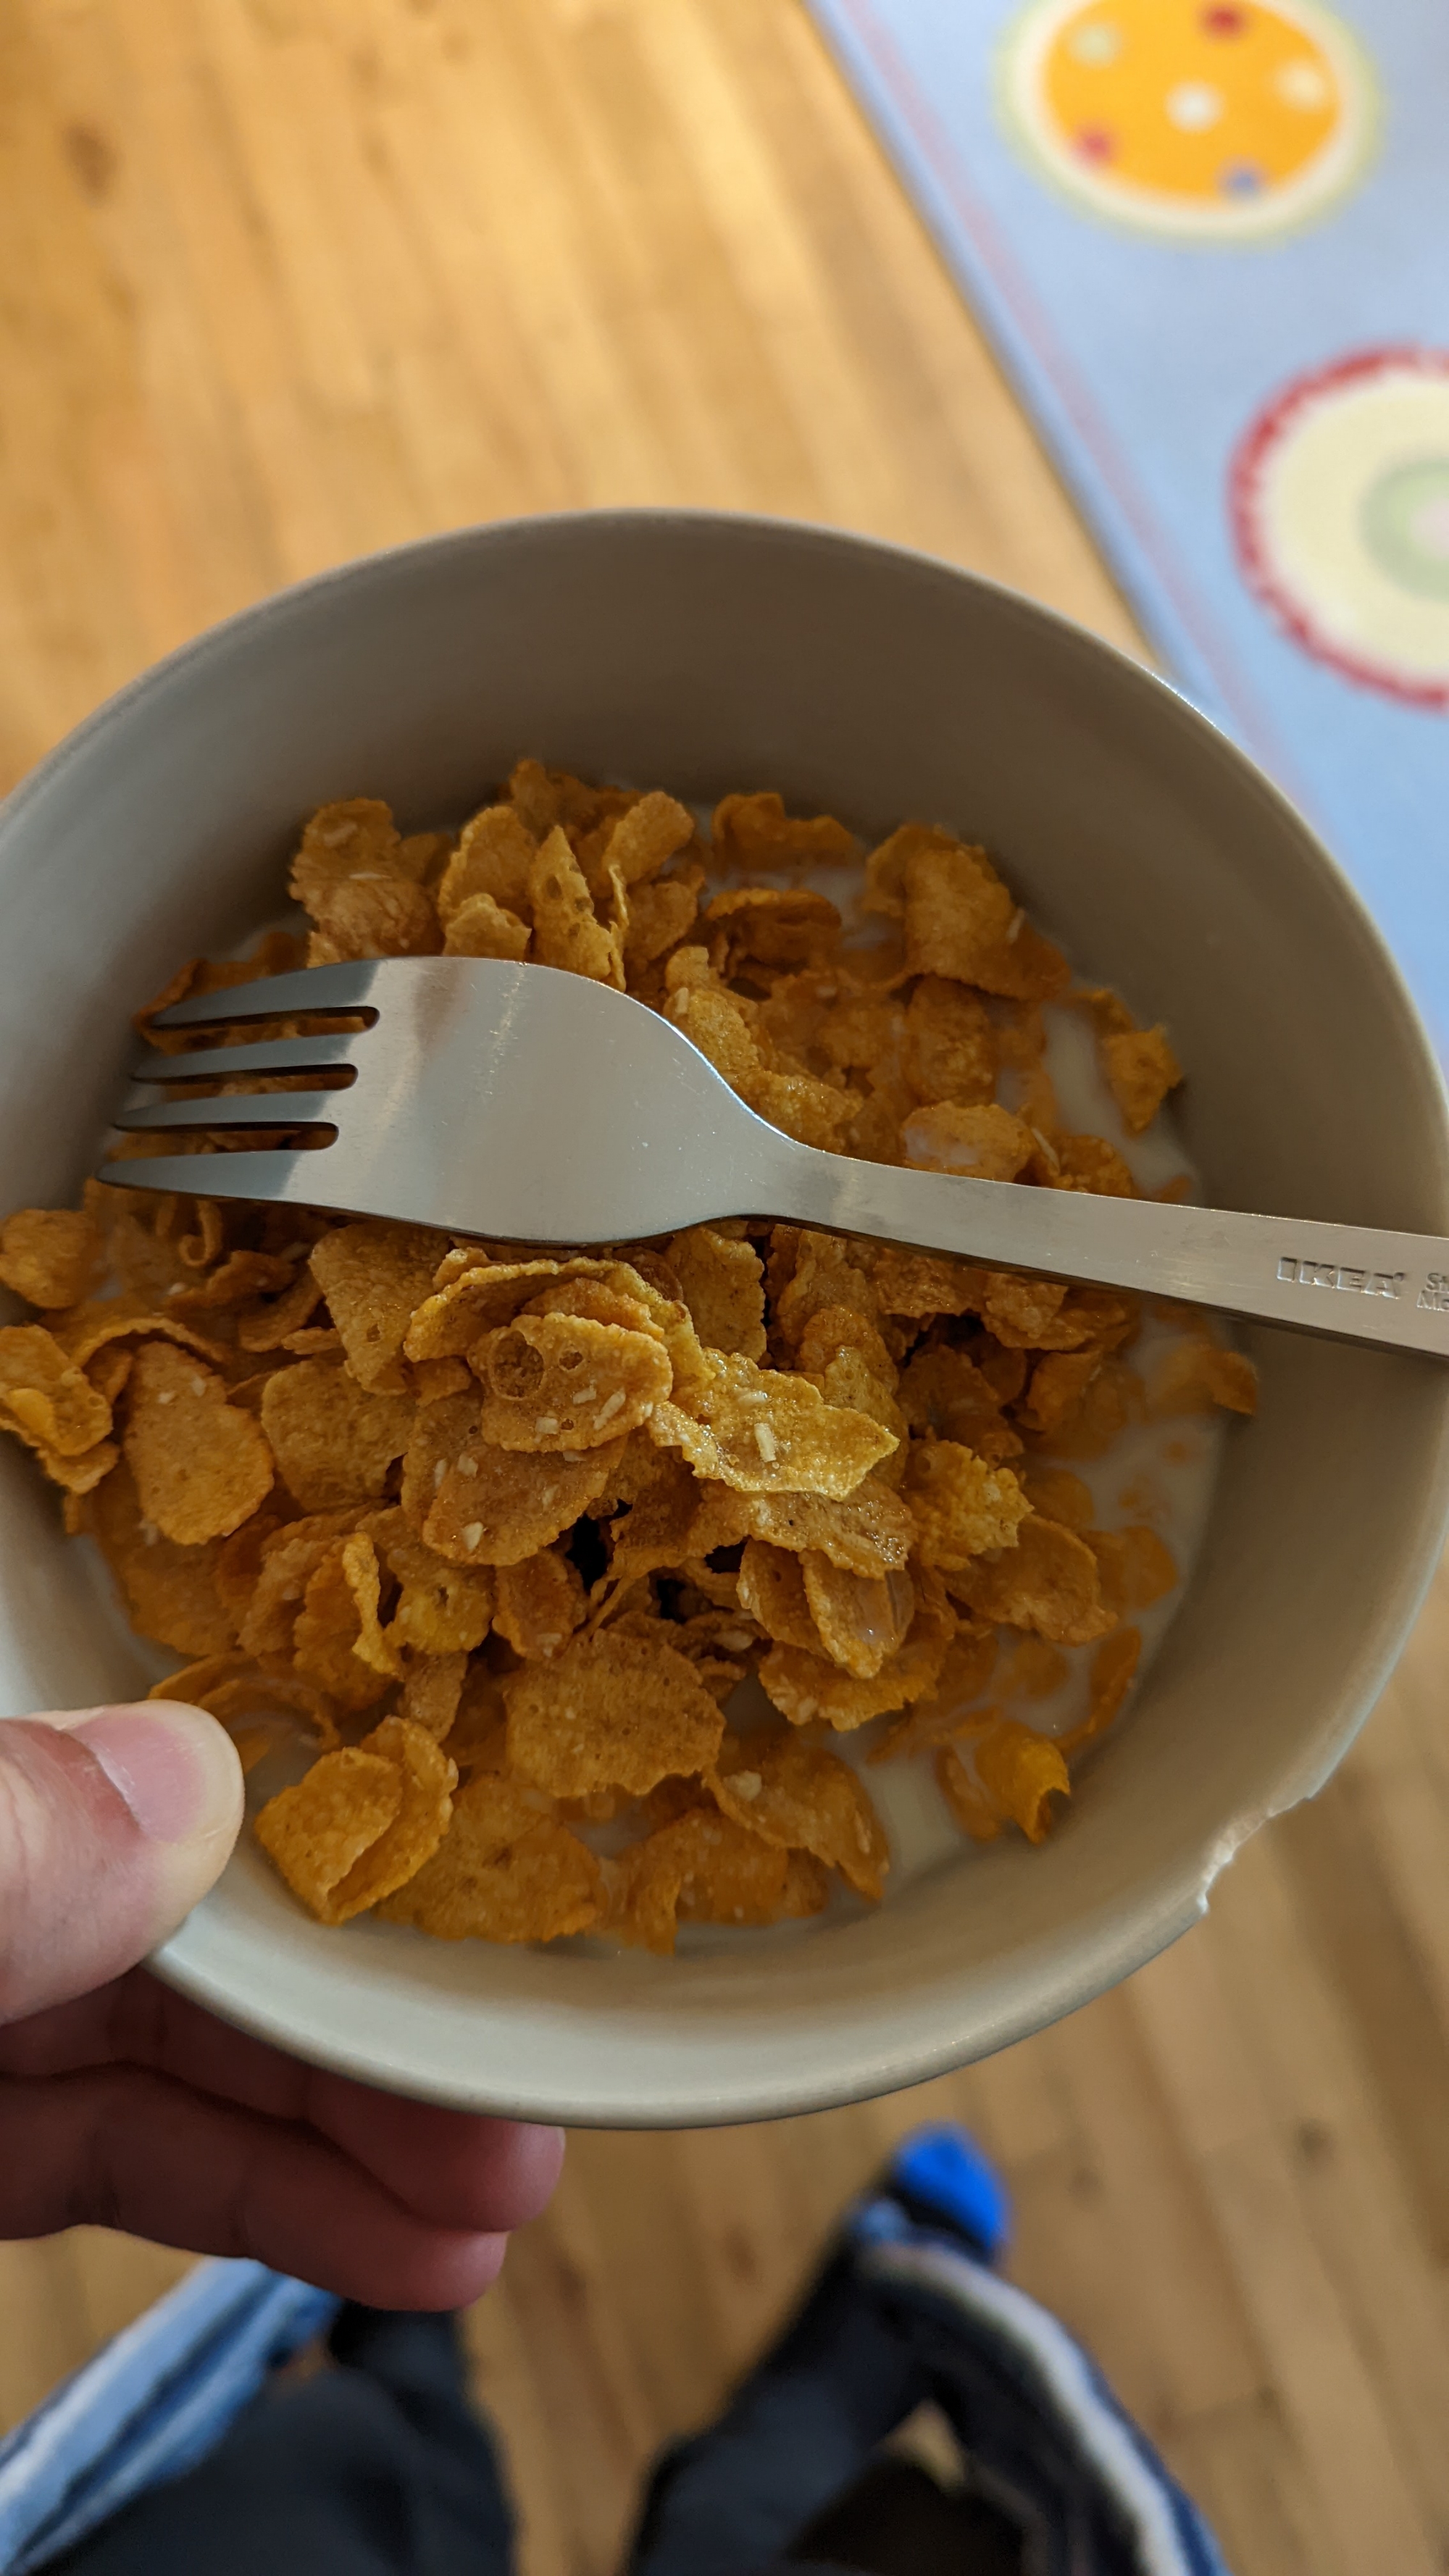 A bowl of cereal, with a fork instead of a spoon, resting on top of it by accident